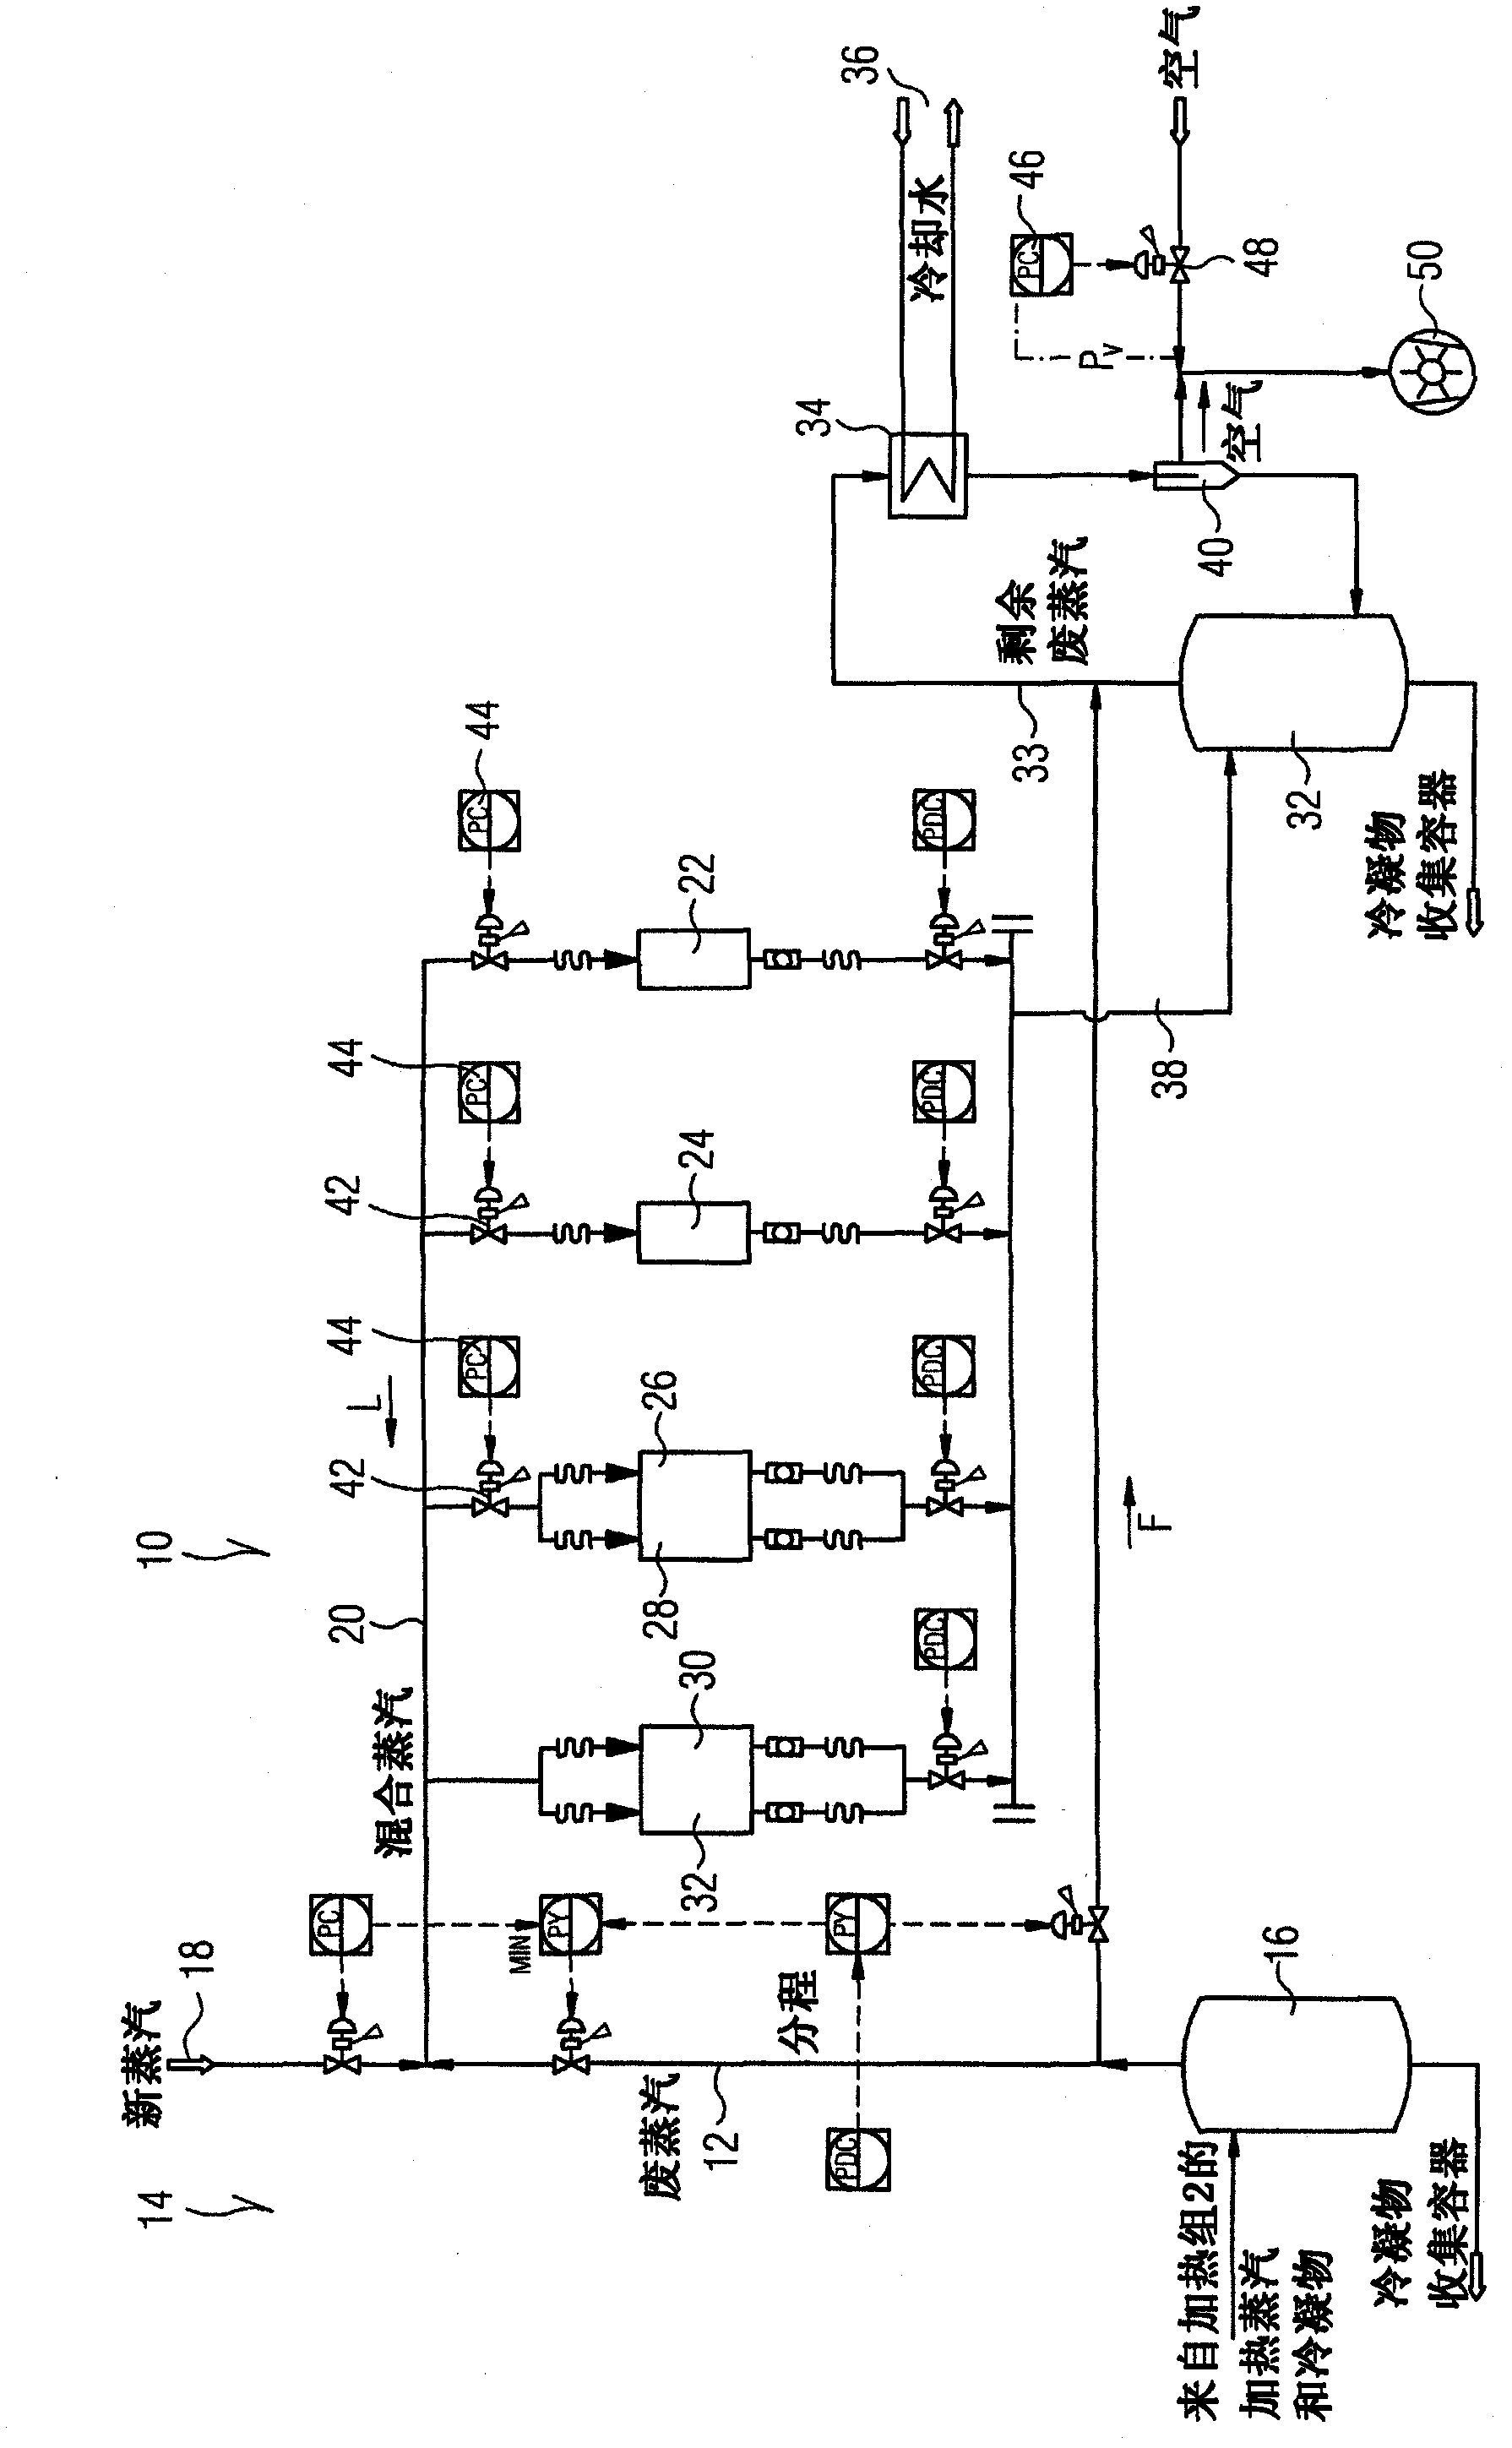 Heating system for treating a fibrous material web